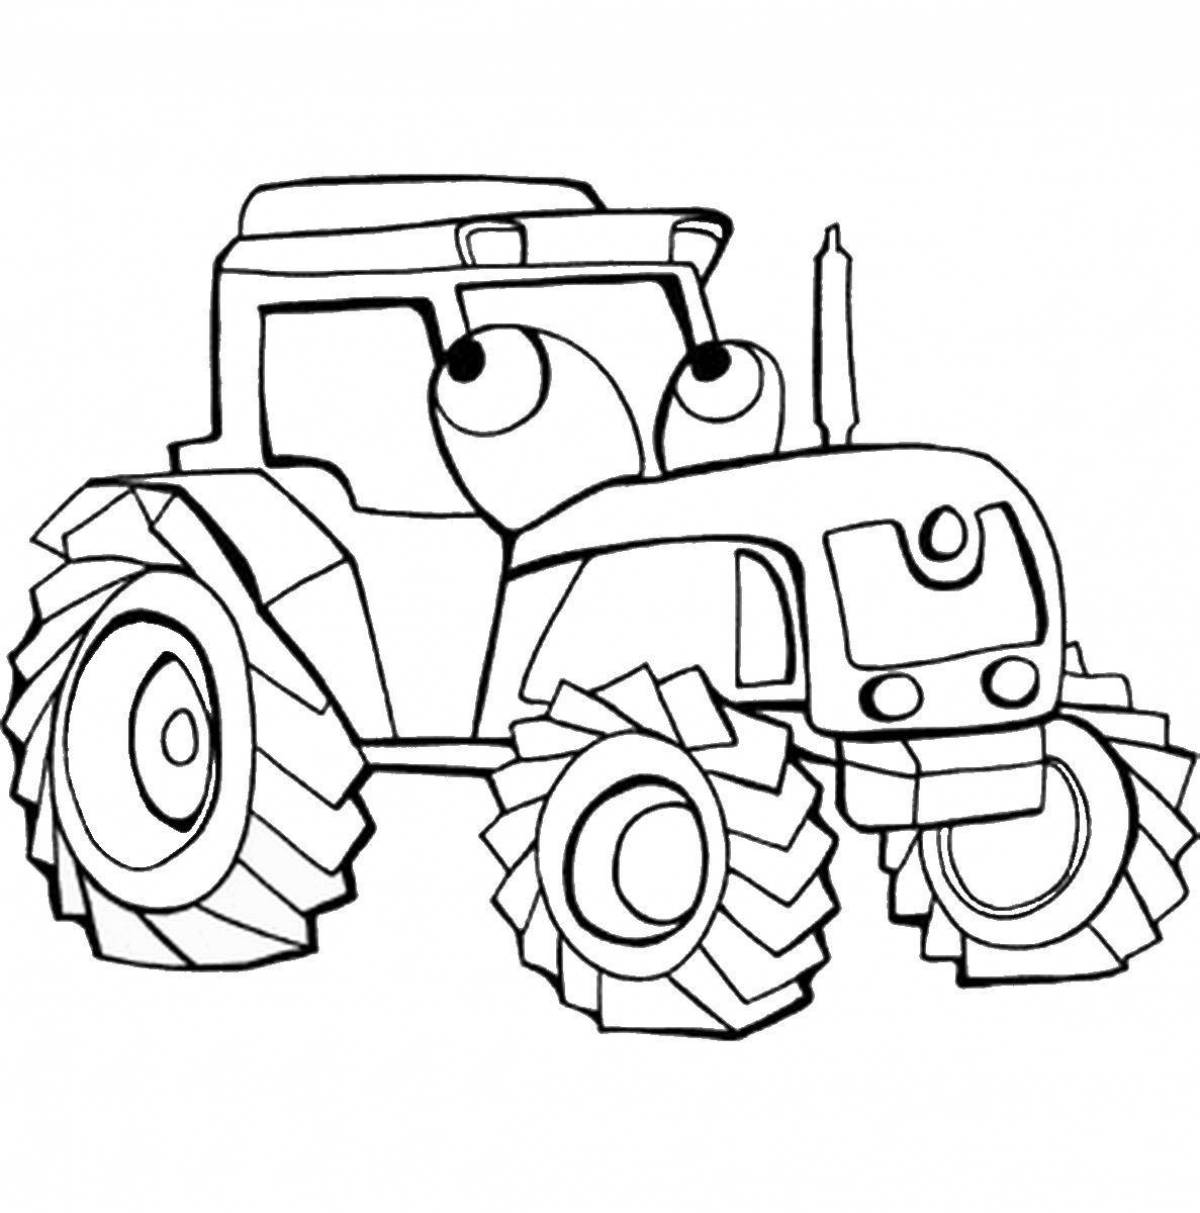 Bright tractor coloring for the little ones